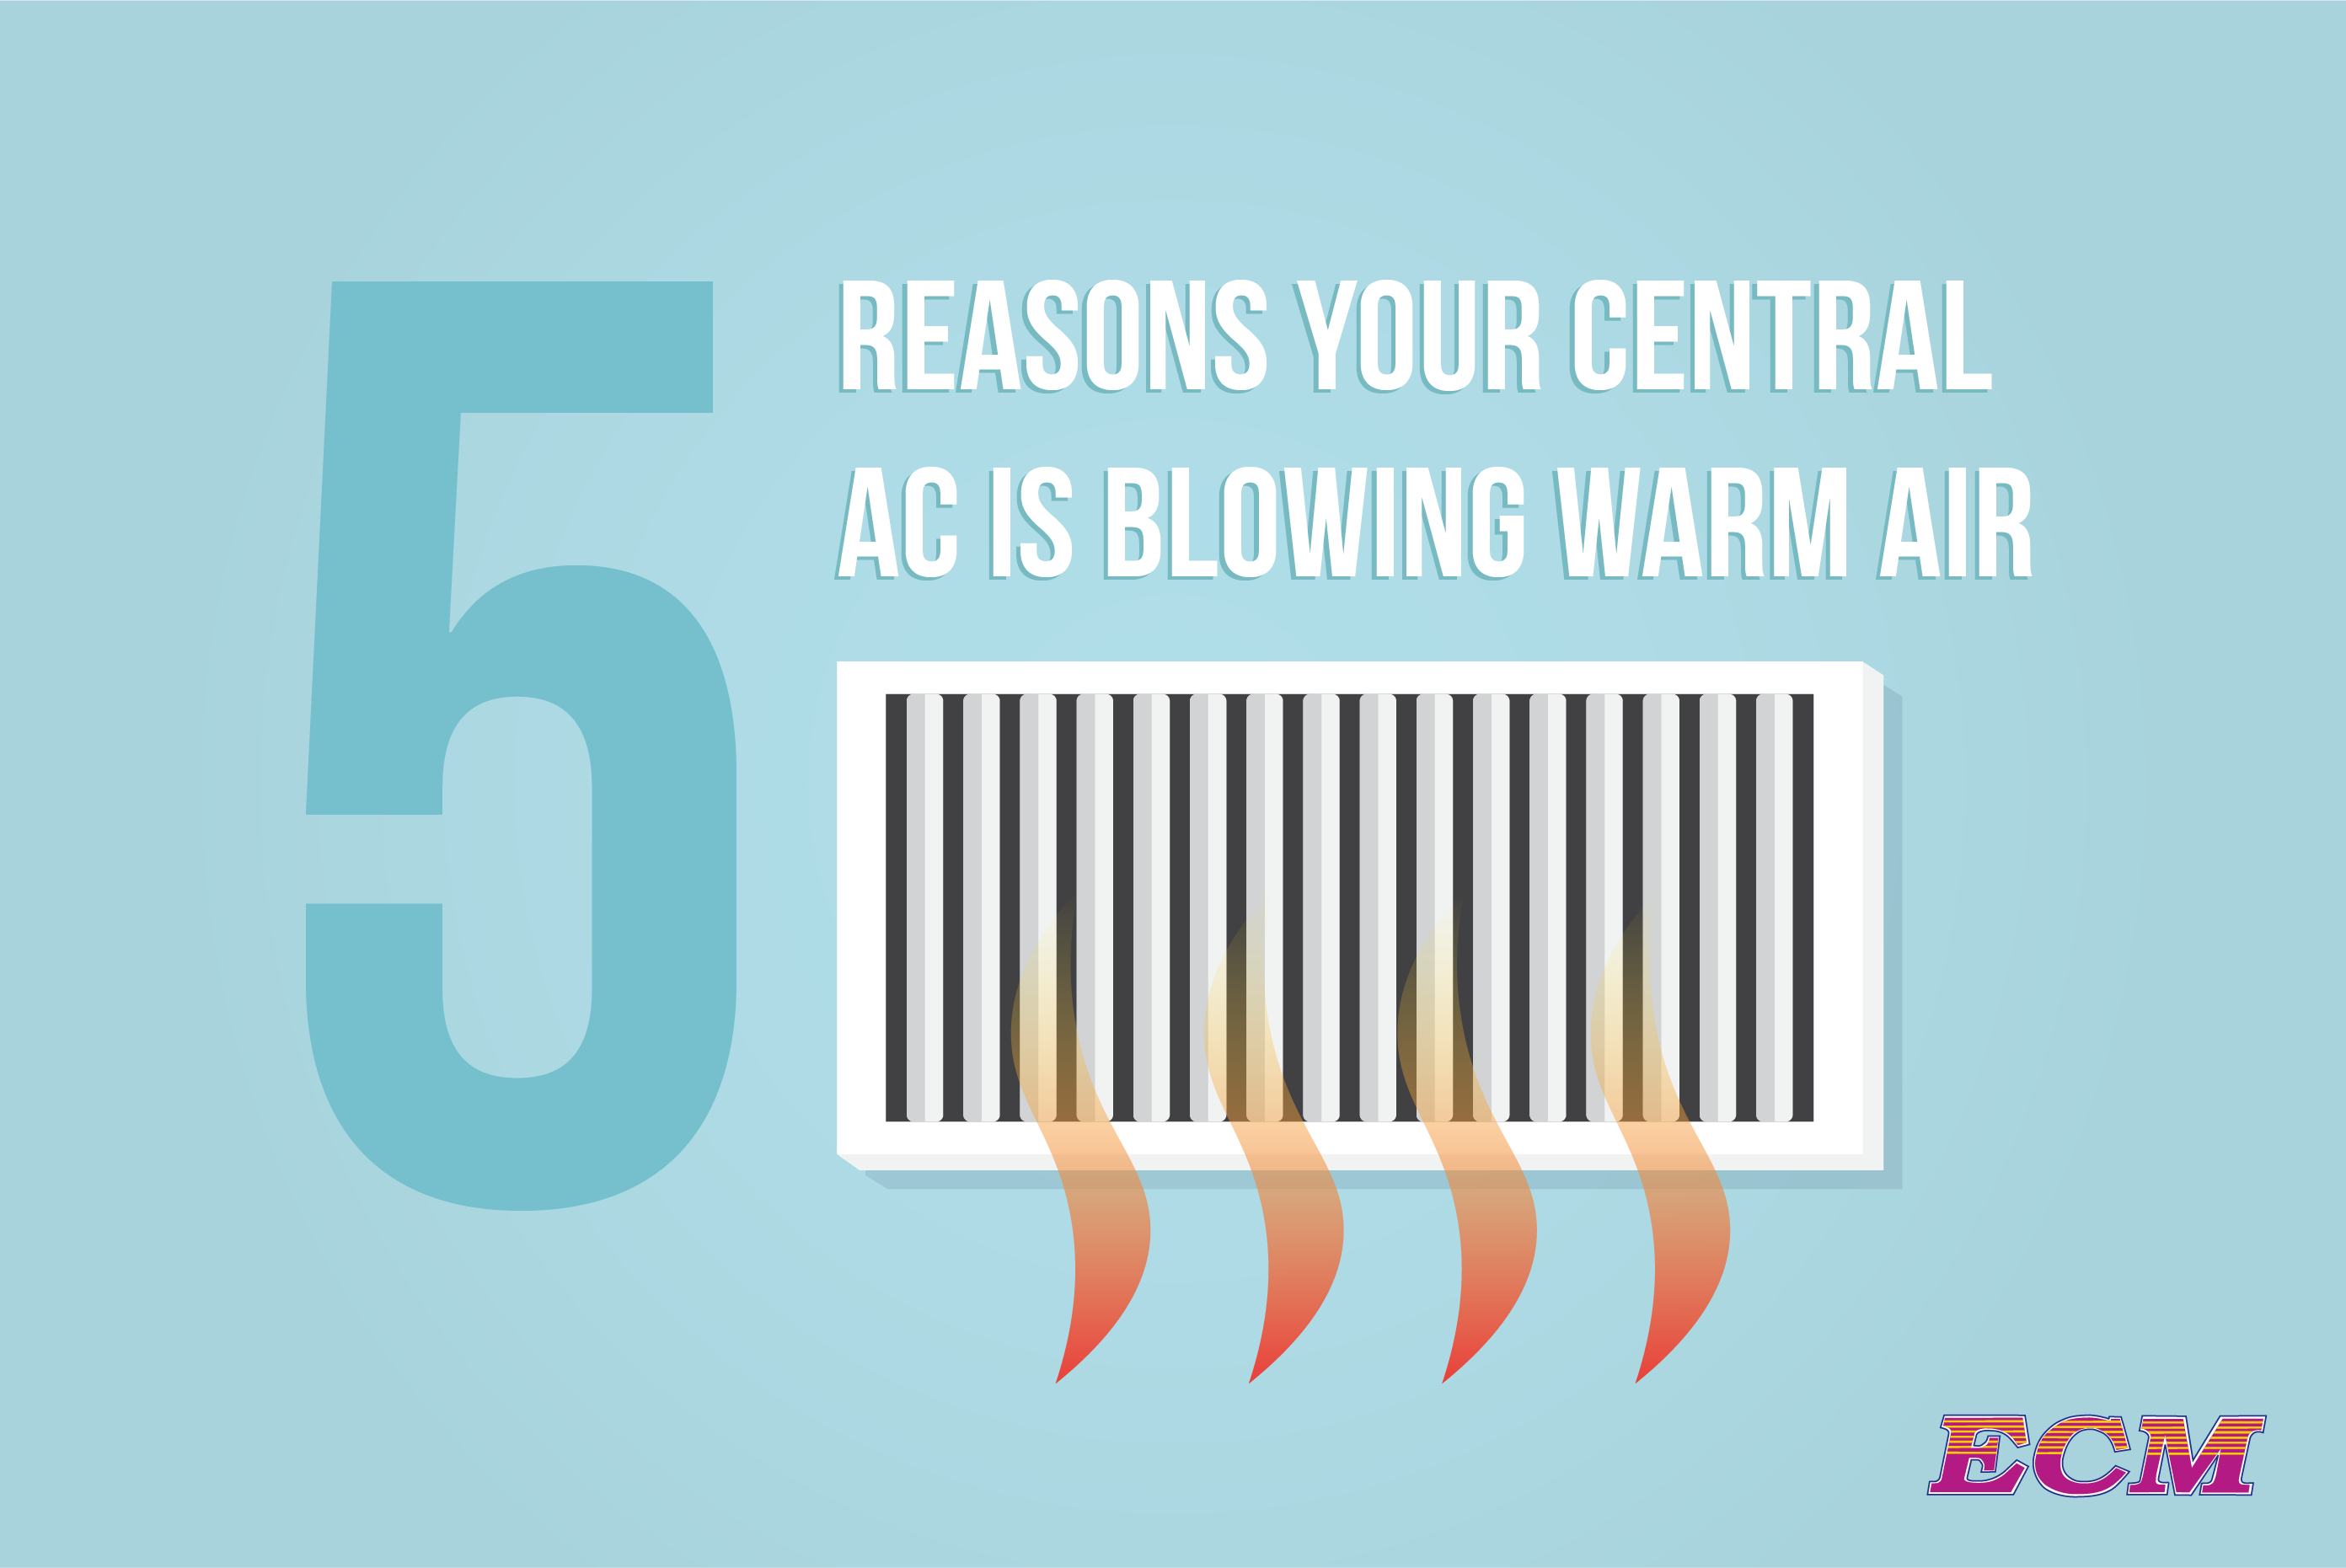 5 Things to Stop Your AC Blowing Warm ECM Air